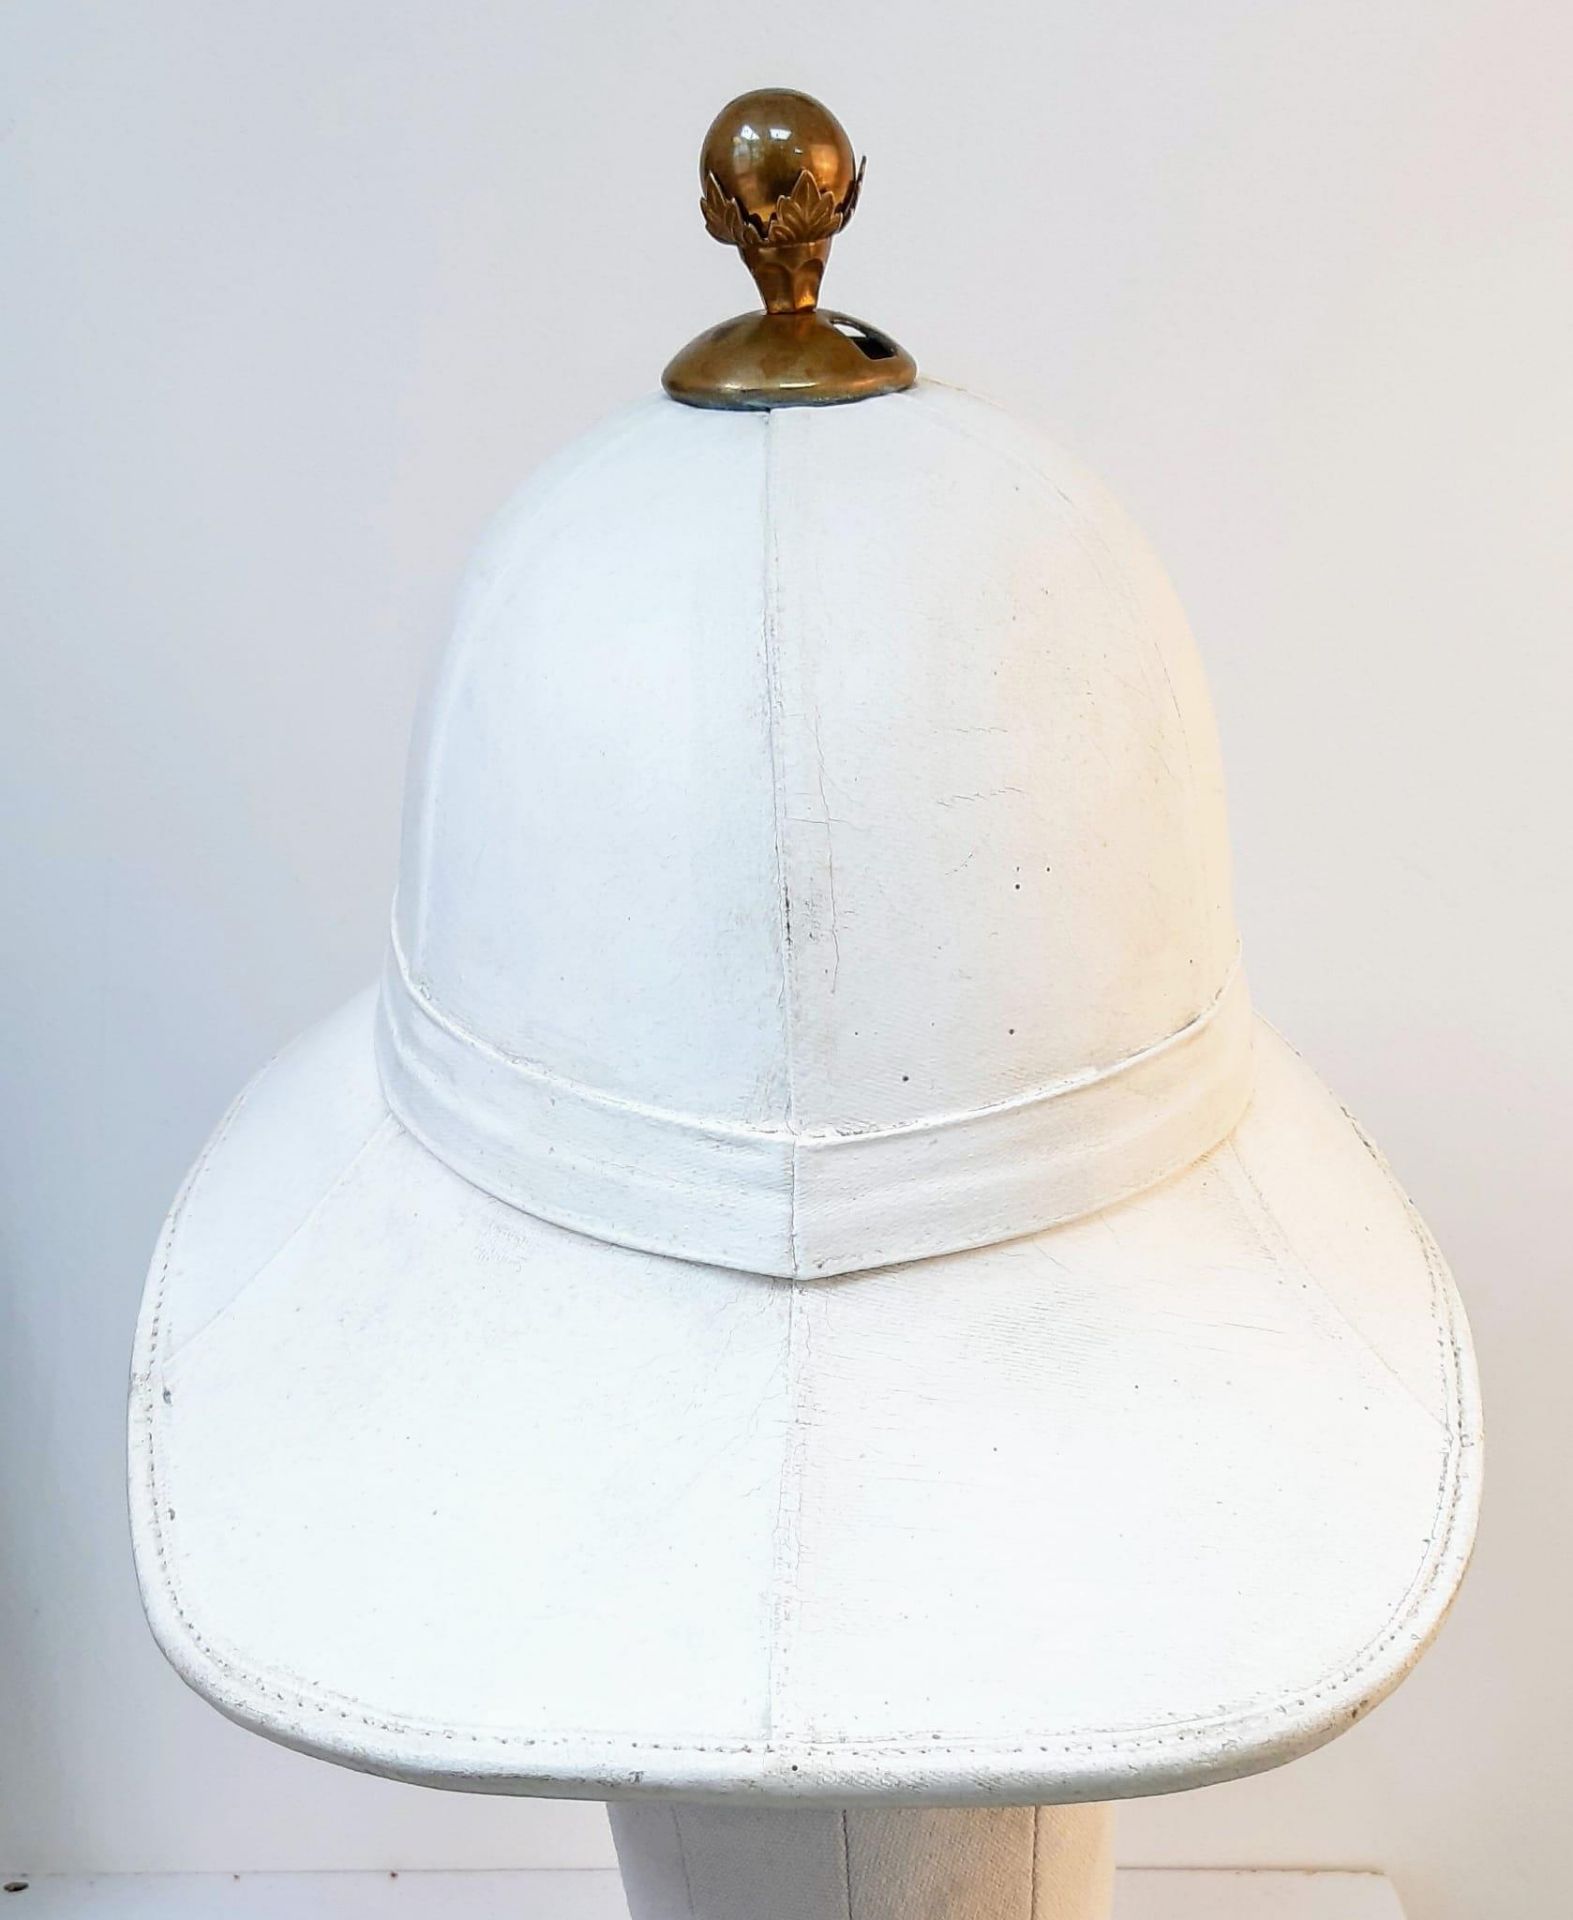 Royal Marines Band Other Ranks Wolseley Pith Helmet with Badge of Queen Elizabeth II (1952-2022). - Image 3 of 5